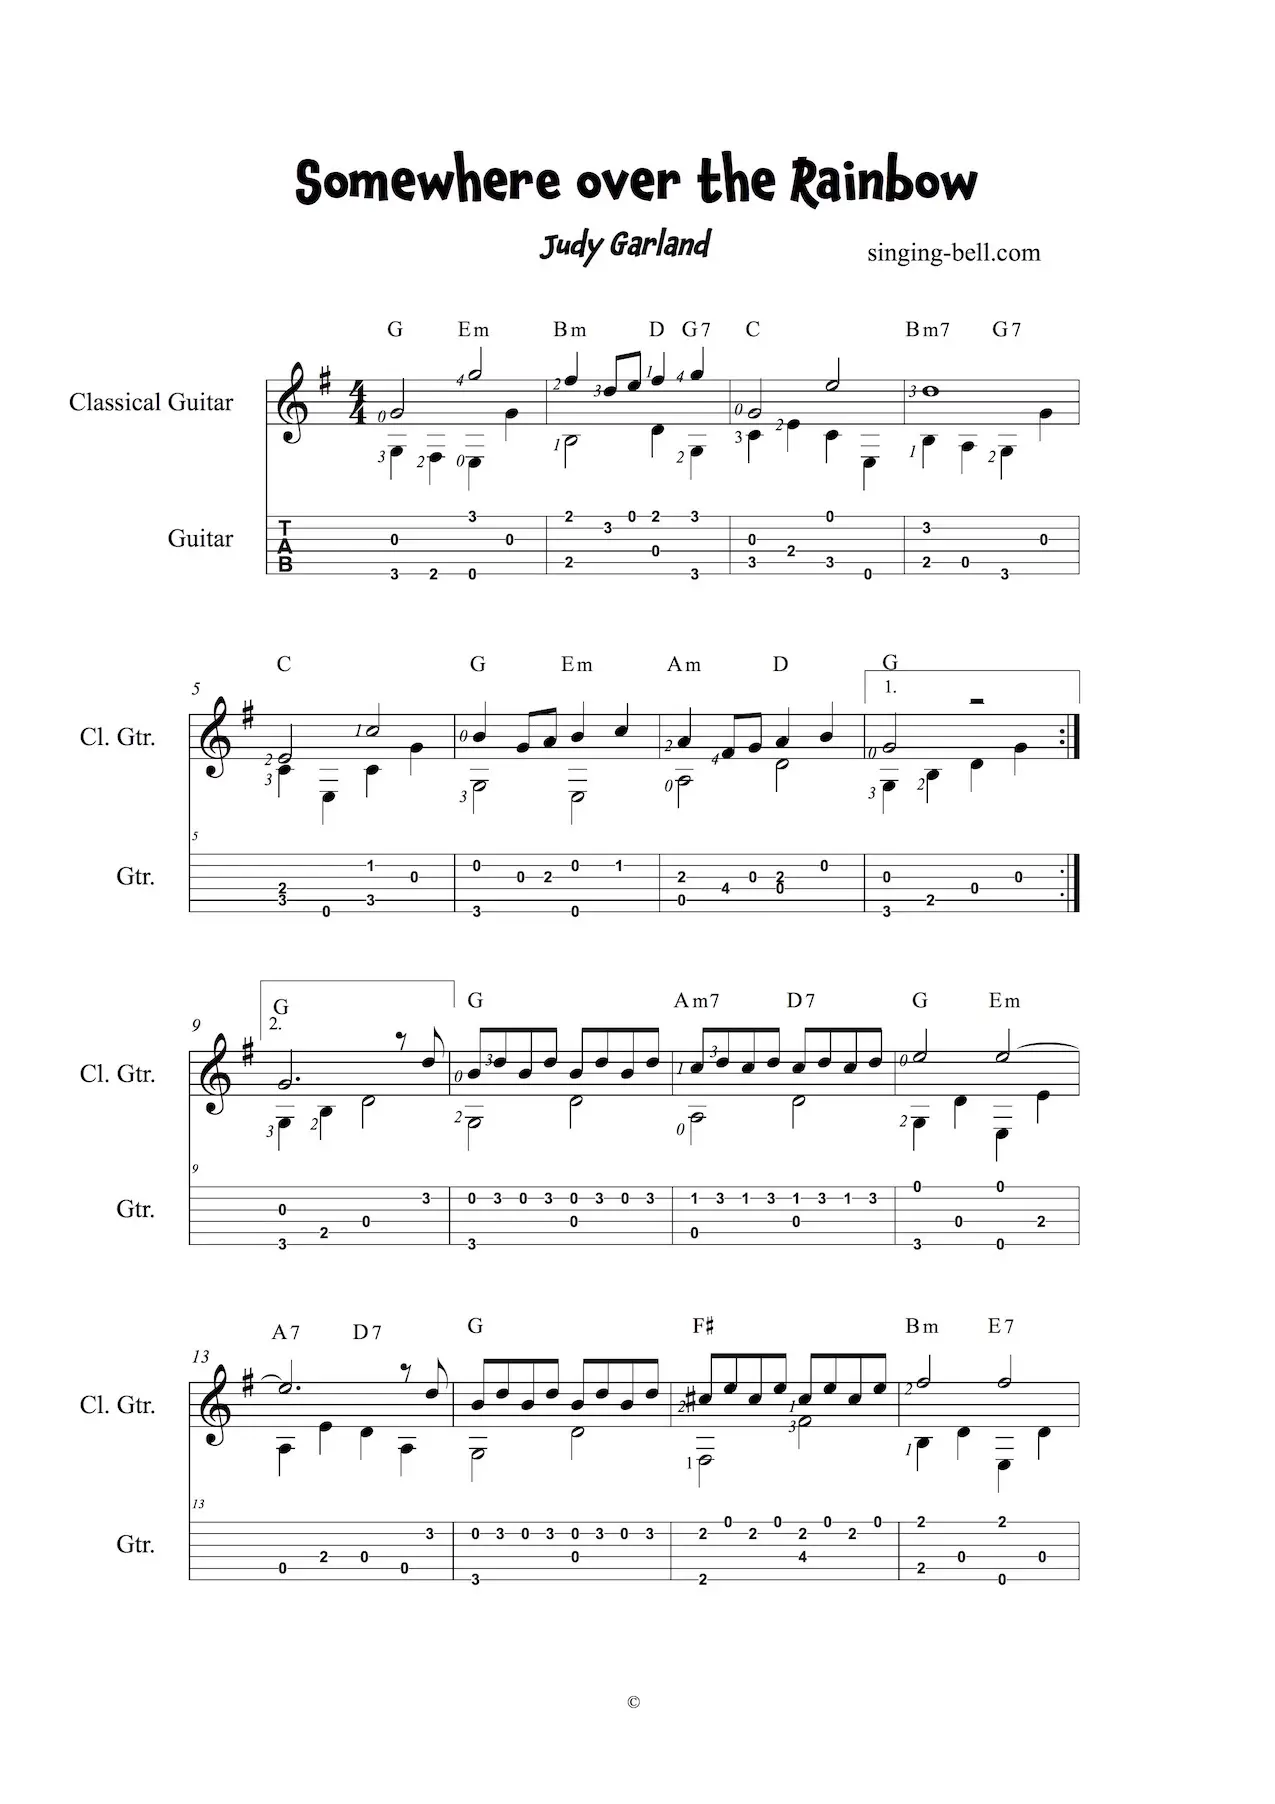 Somewhere over the Rainbow Judy Garland easy beginners fingerstyle guitar sheet music with notes and tablature in the key of G - page 1.